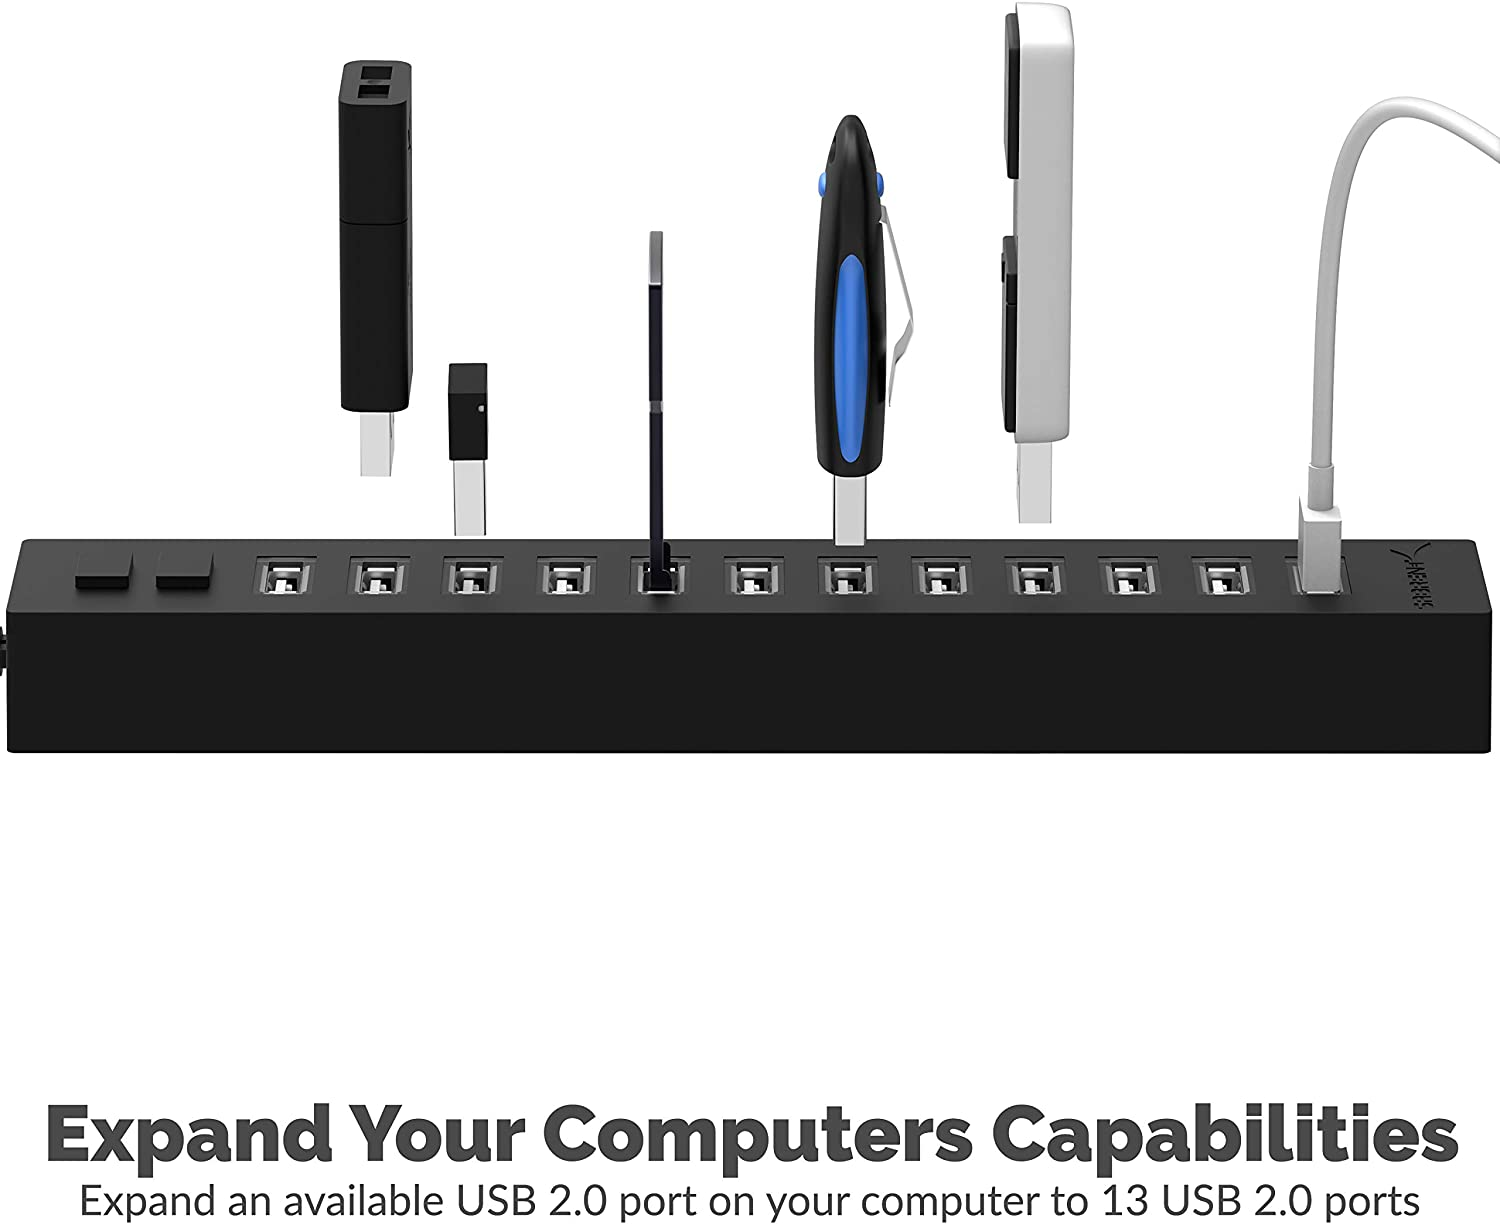 SABRENT 13 Port High Speed USB 2.0 Hub with Power Adapter and 2 Control Switches (HB-U14P)